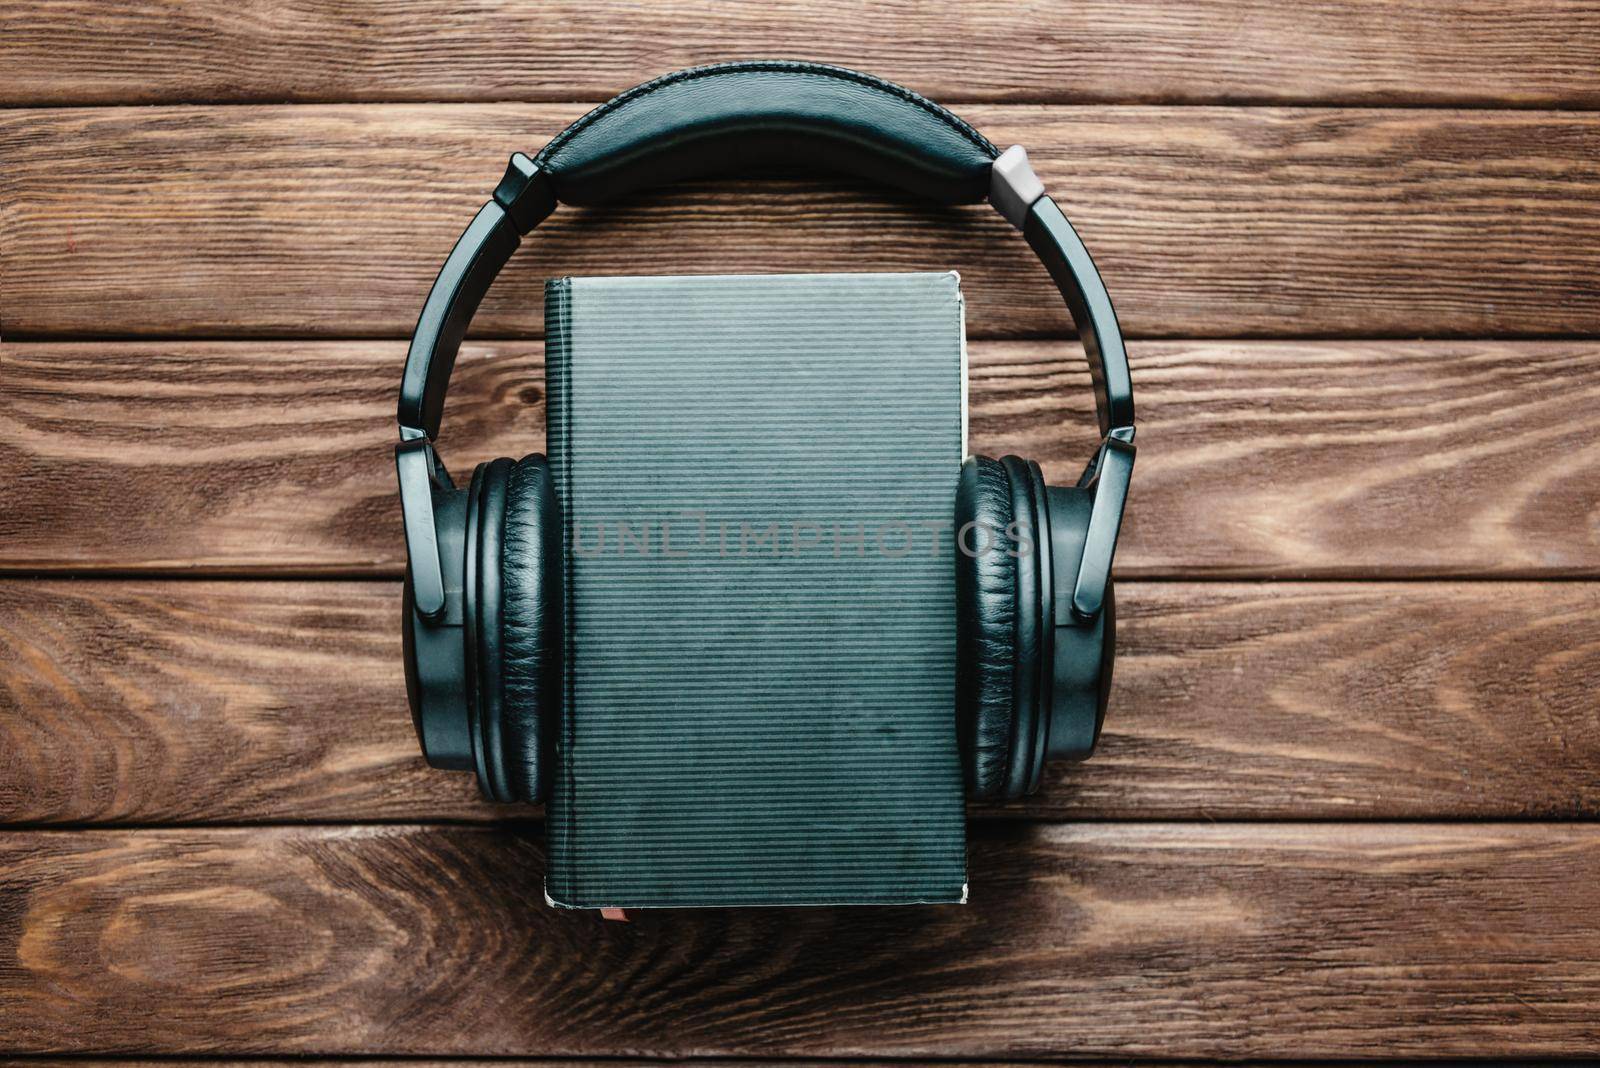 Headphones around a paper book on a wooden background, space for text on the cover of book. Concept of audiobook.